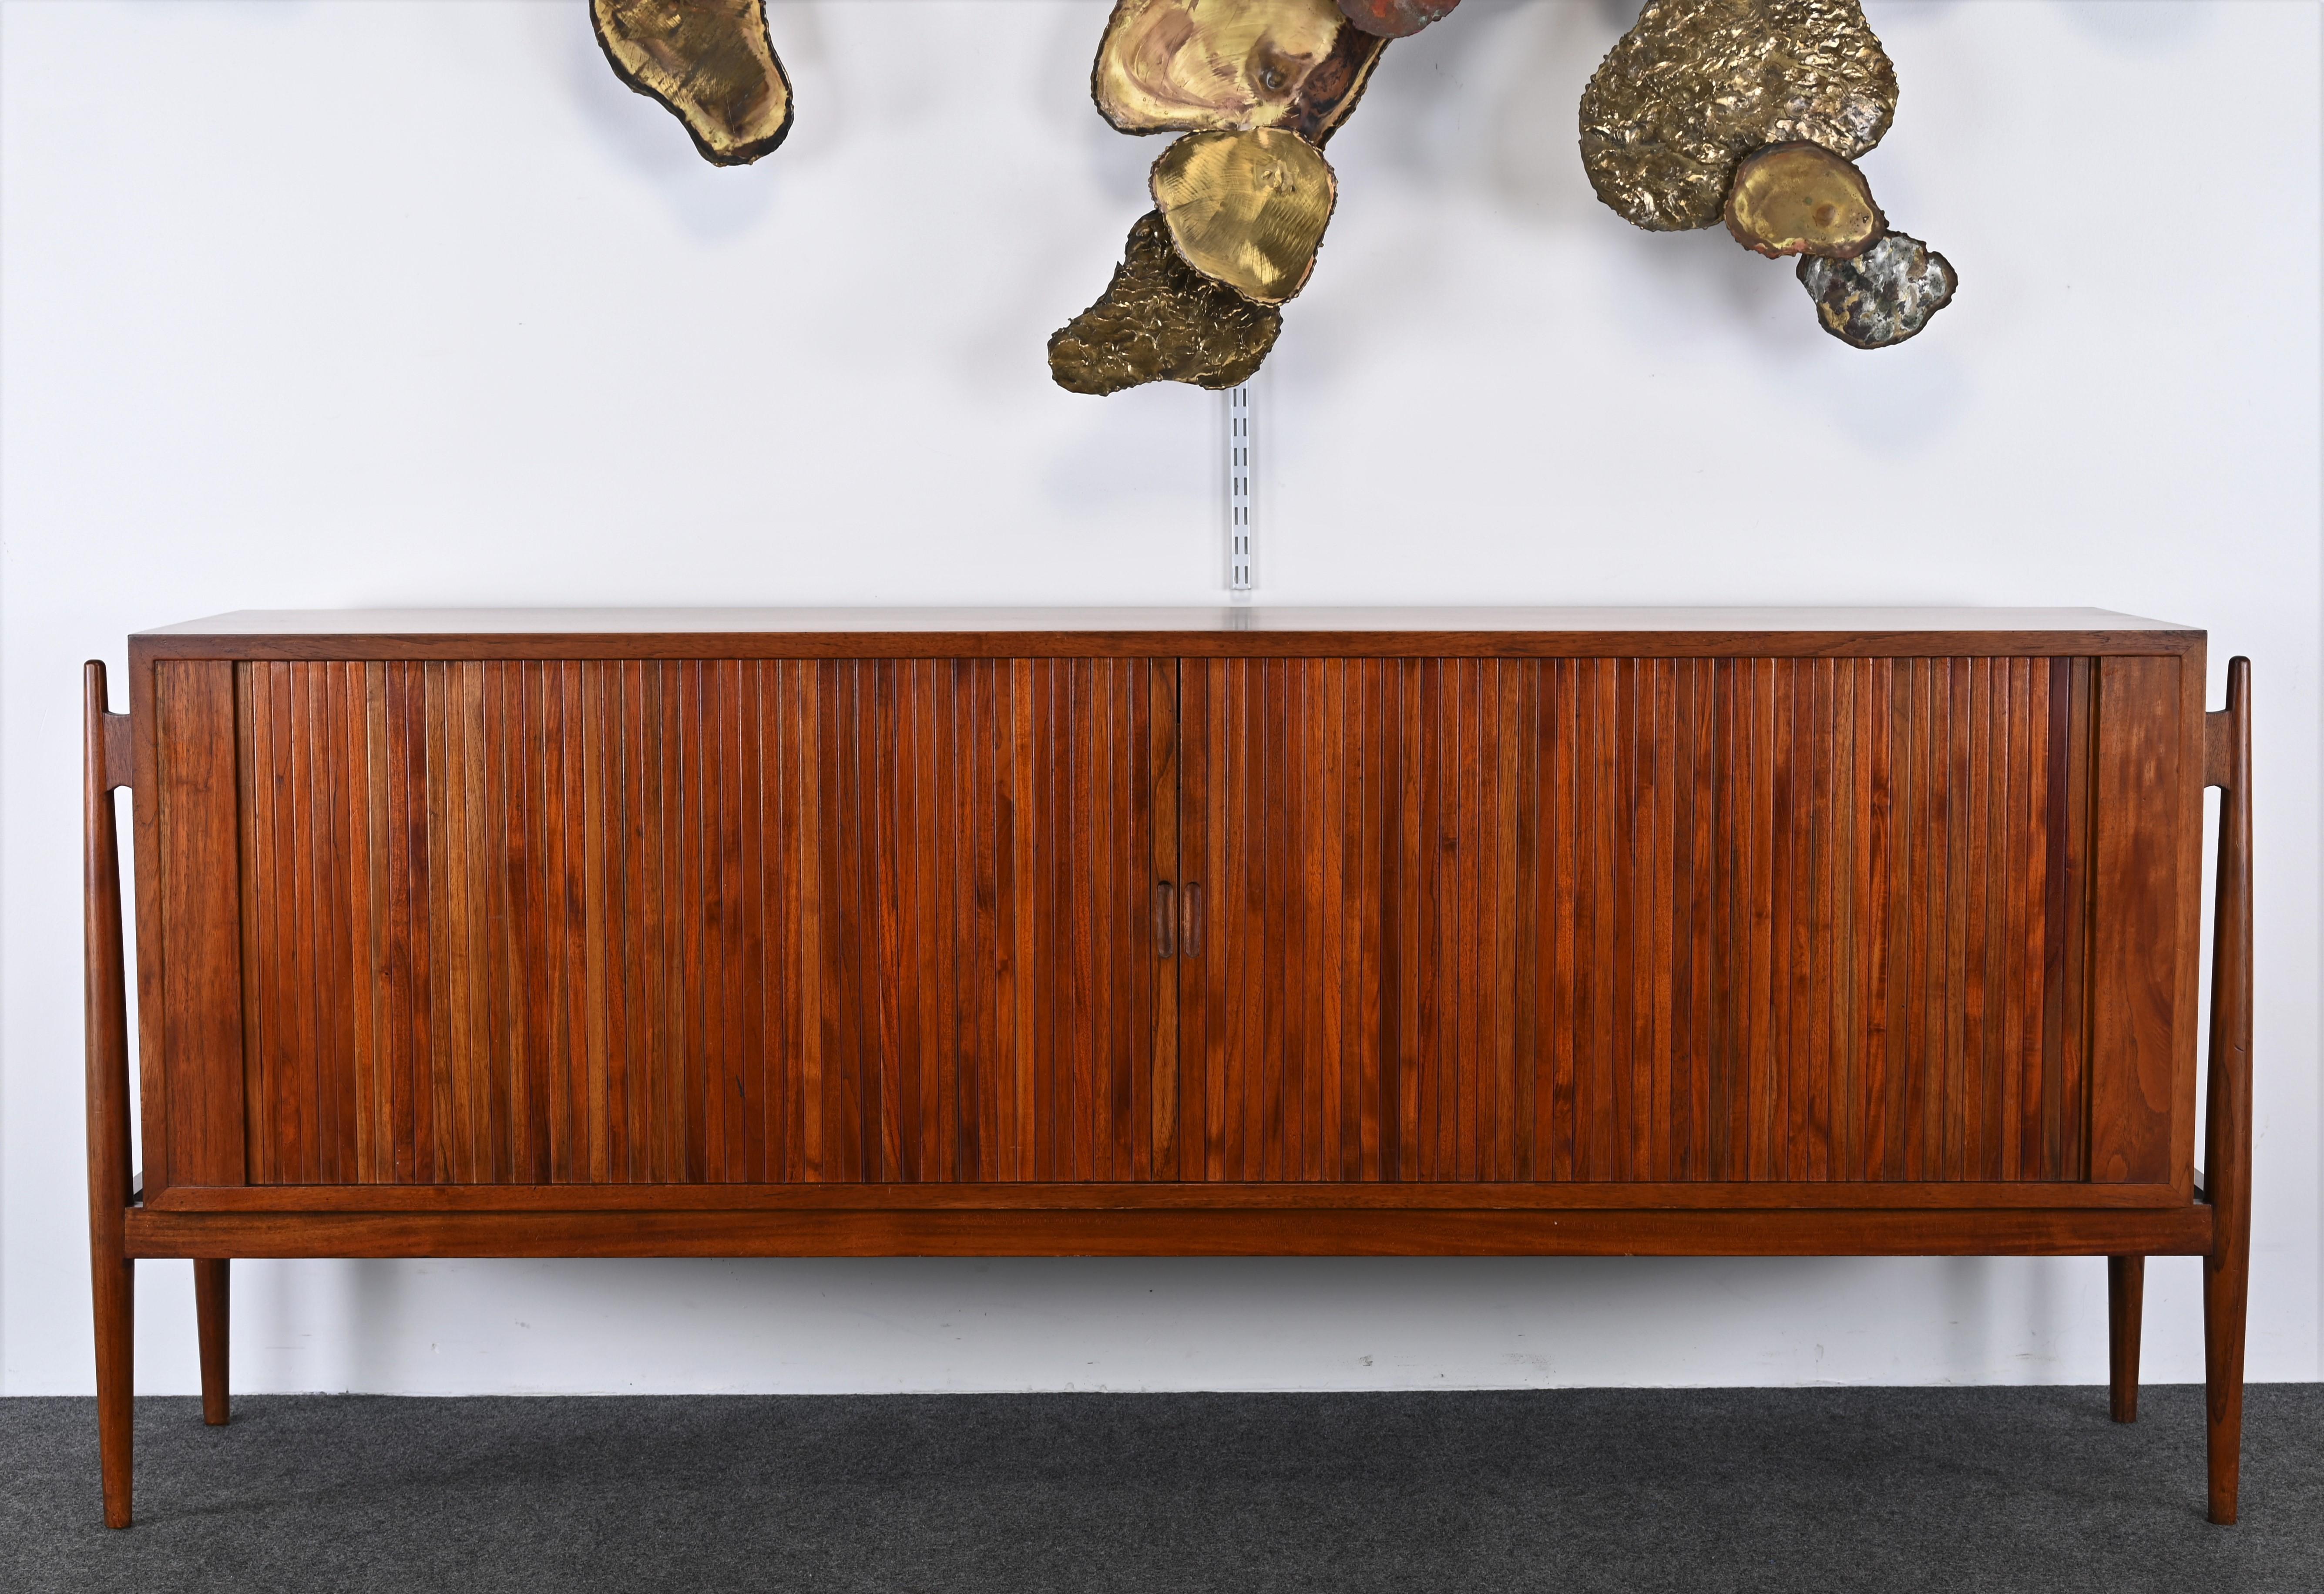 A beautiful Teak Credenza in the manner of Finn Juhl. Great modern lines and simple design. This sideboard is of Asian manufacture but looks very much like the original produced in the 1960s but at a fraction of the price. Would look great in a